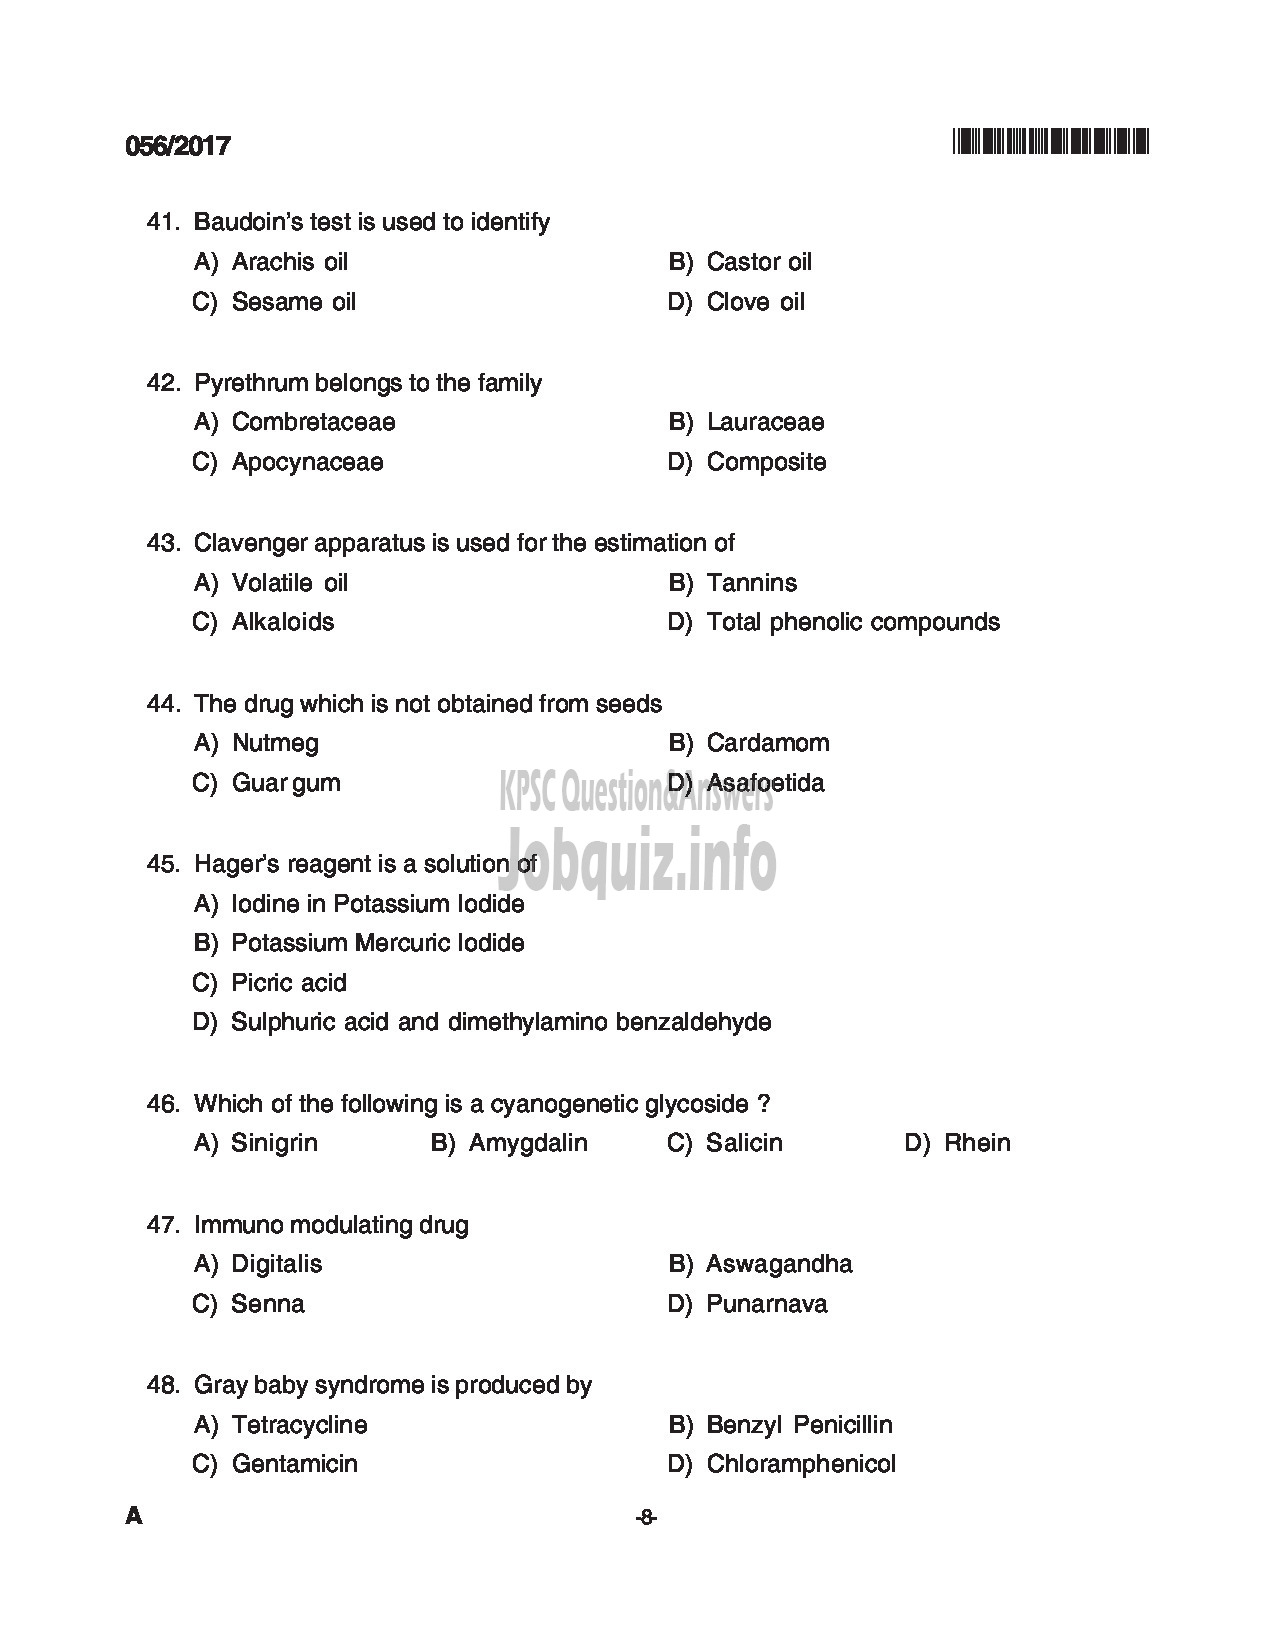 Kerala PSC Question Paper - PHARMACIST GRADE II INSURANCE MEDICAL SERVICES QUESTION PAPER-8